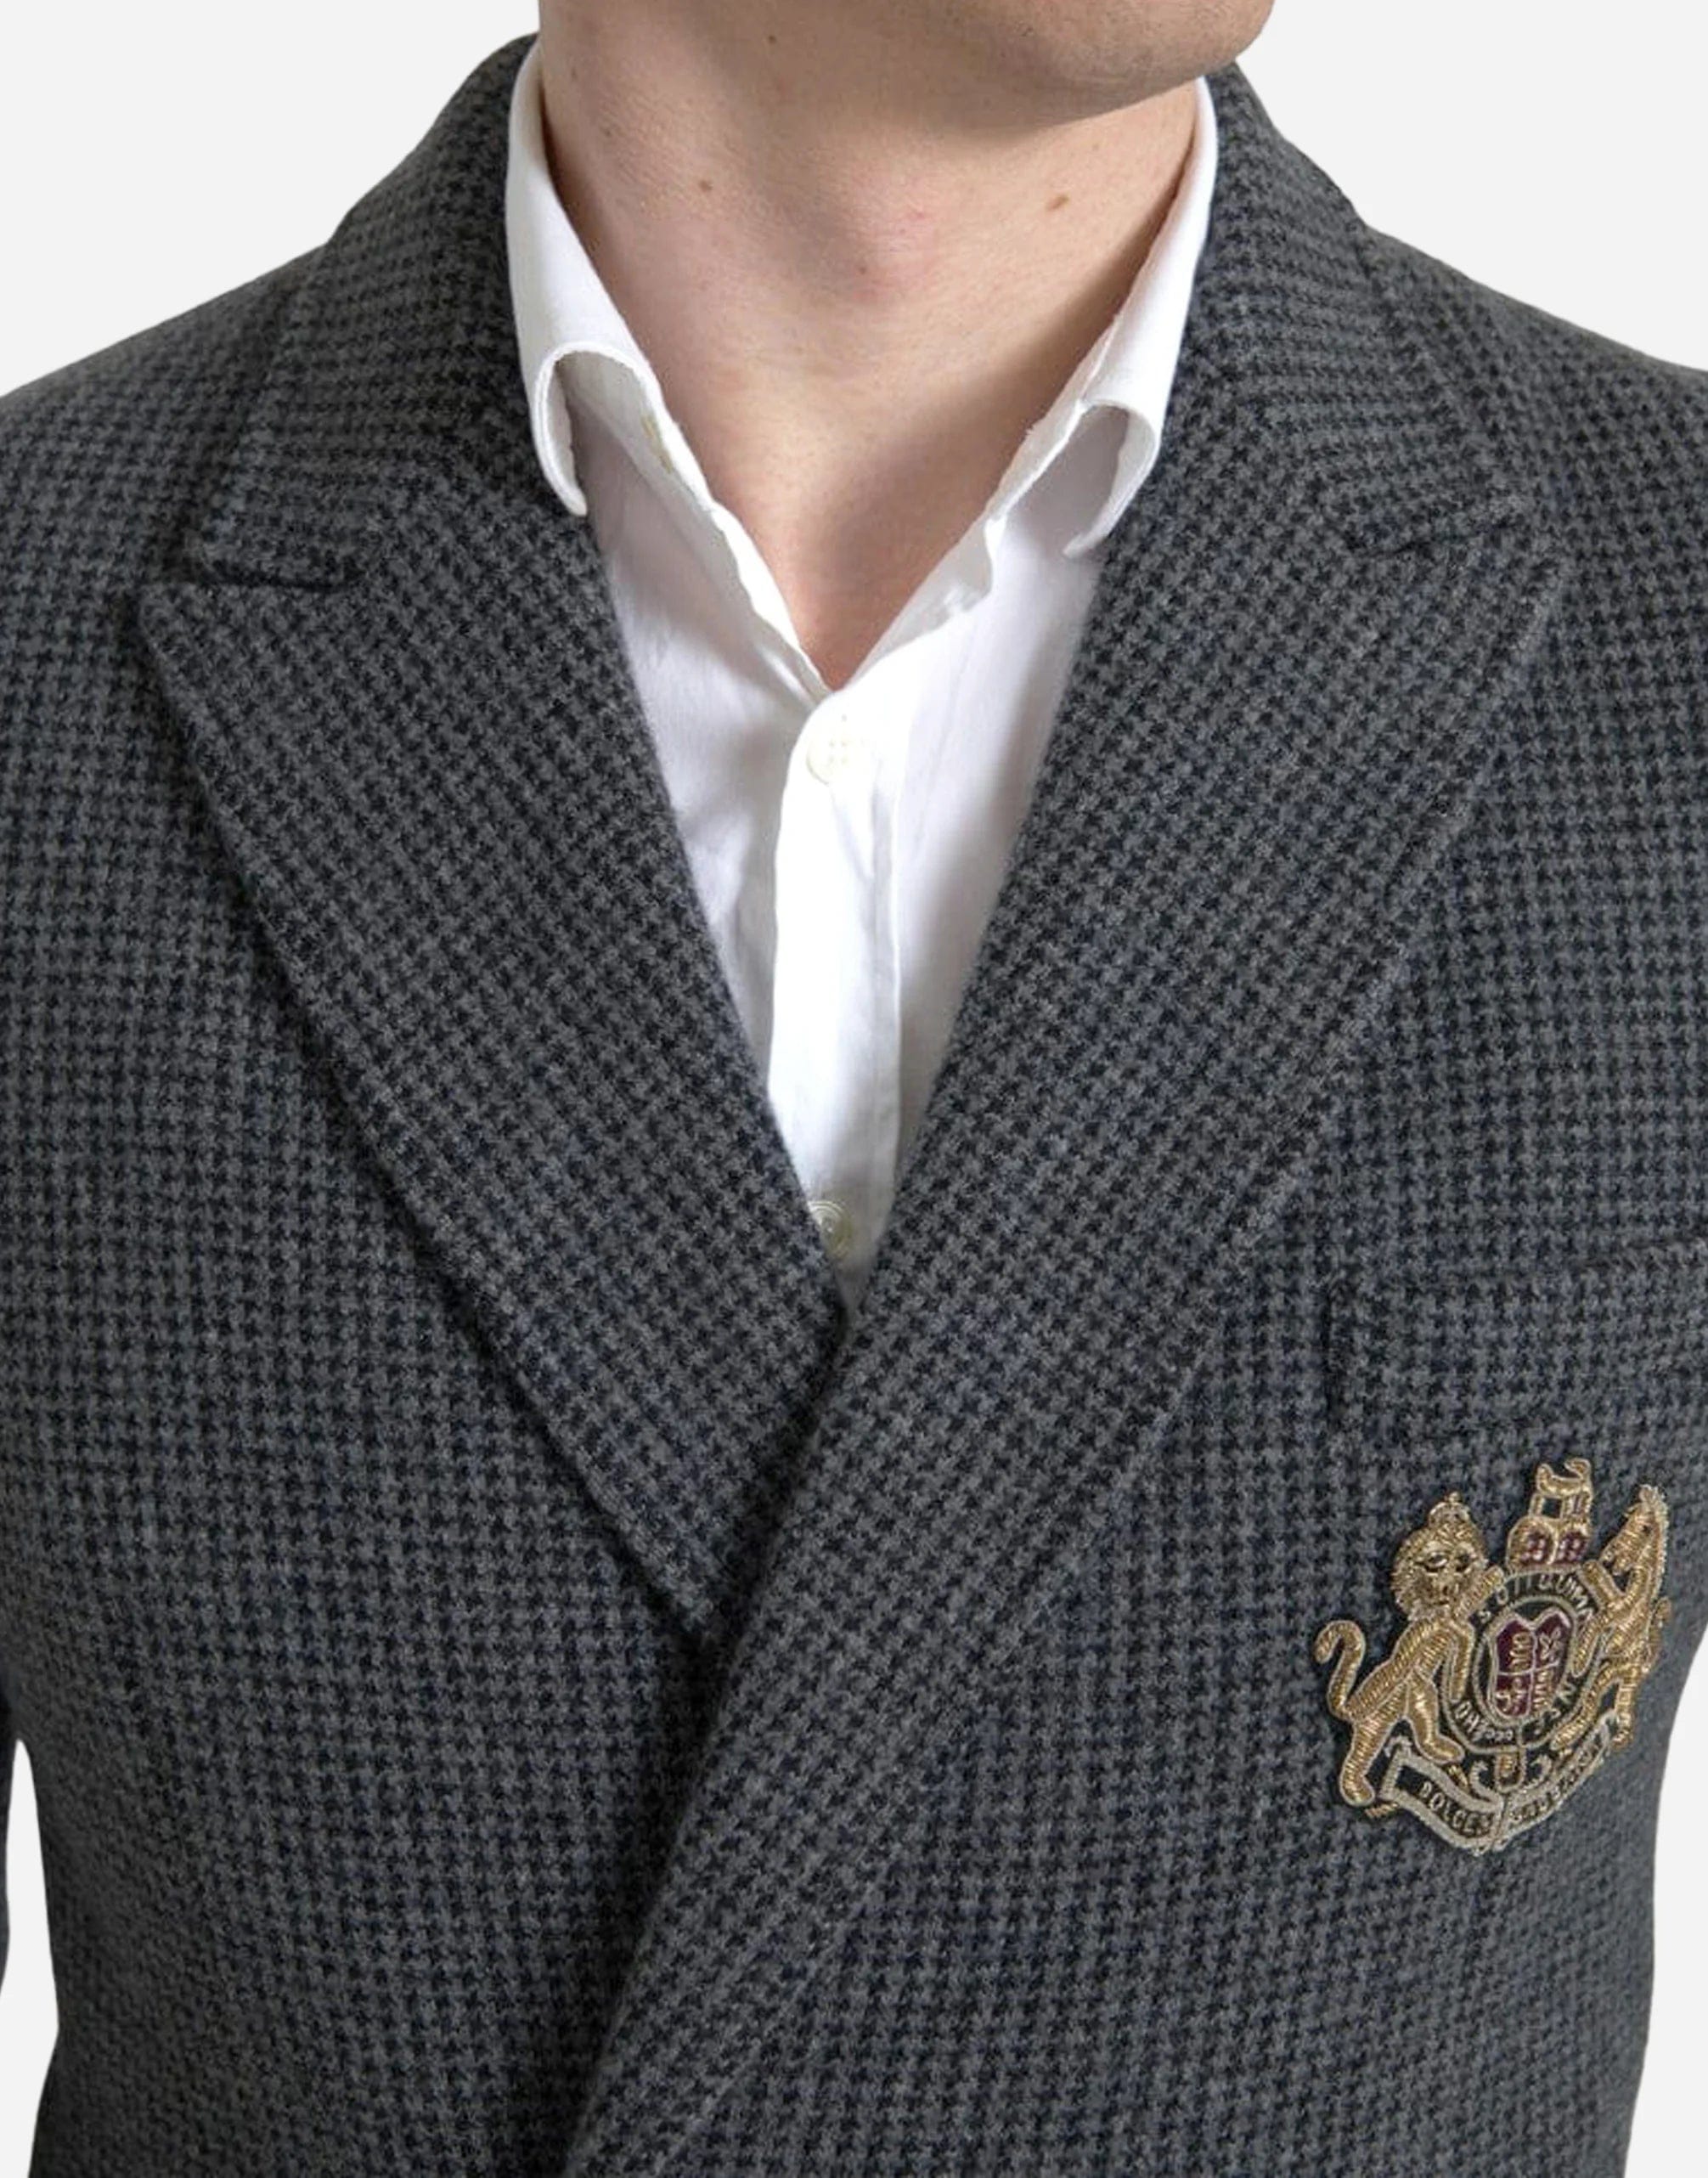 Soit Qui Mal Logo Embroidery Double Breasted Blazer